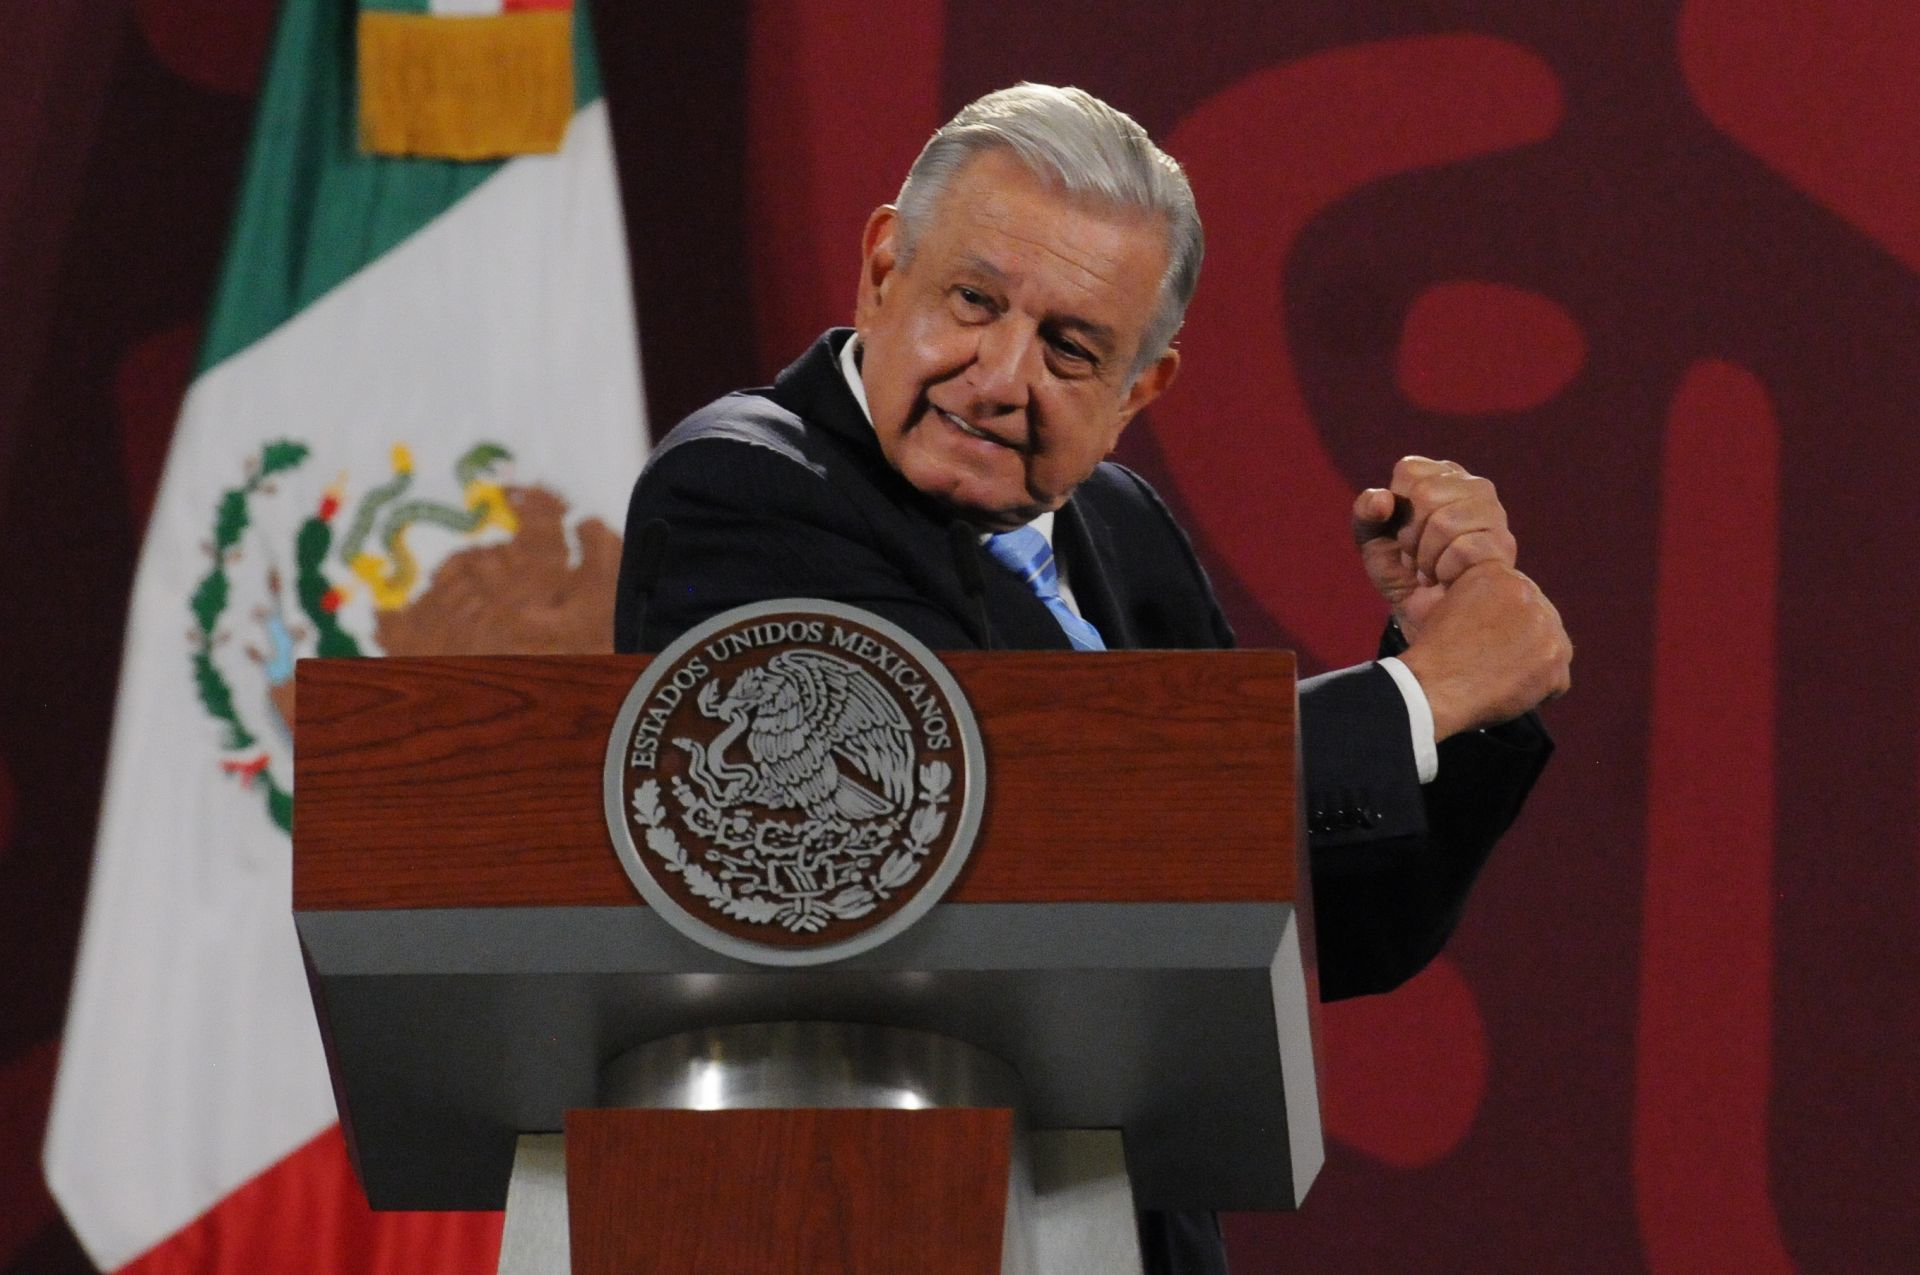 Activists reject AMLO's attacks on the judiciary